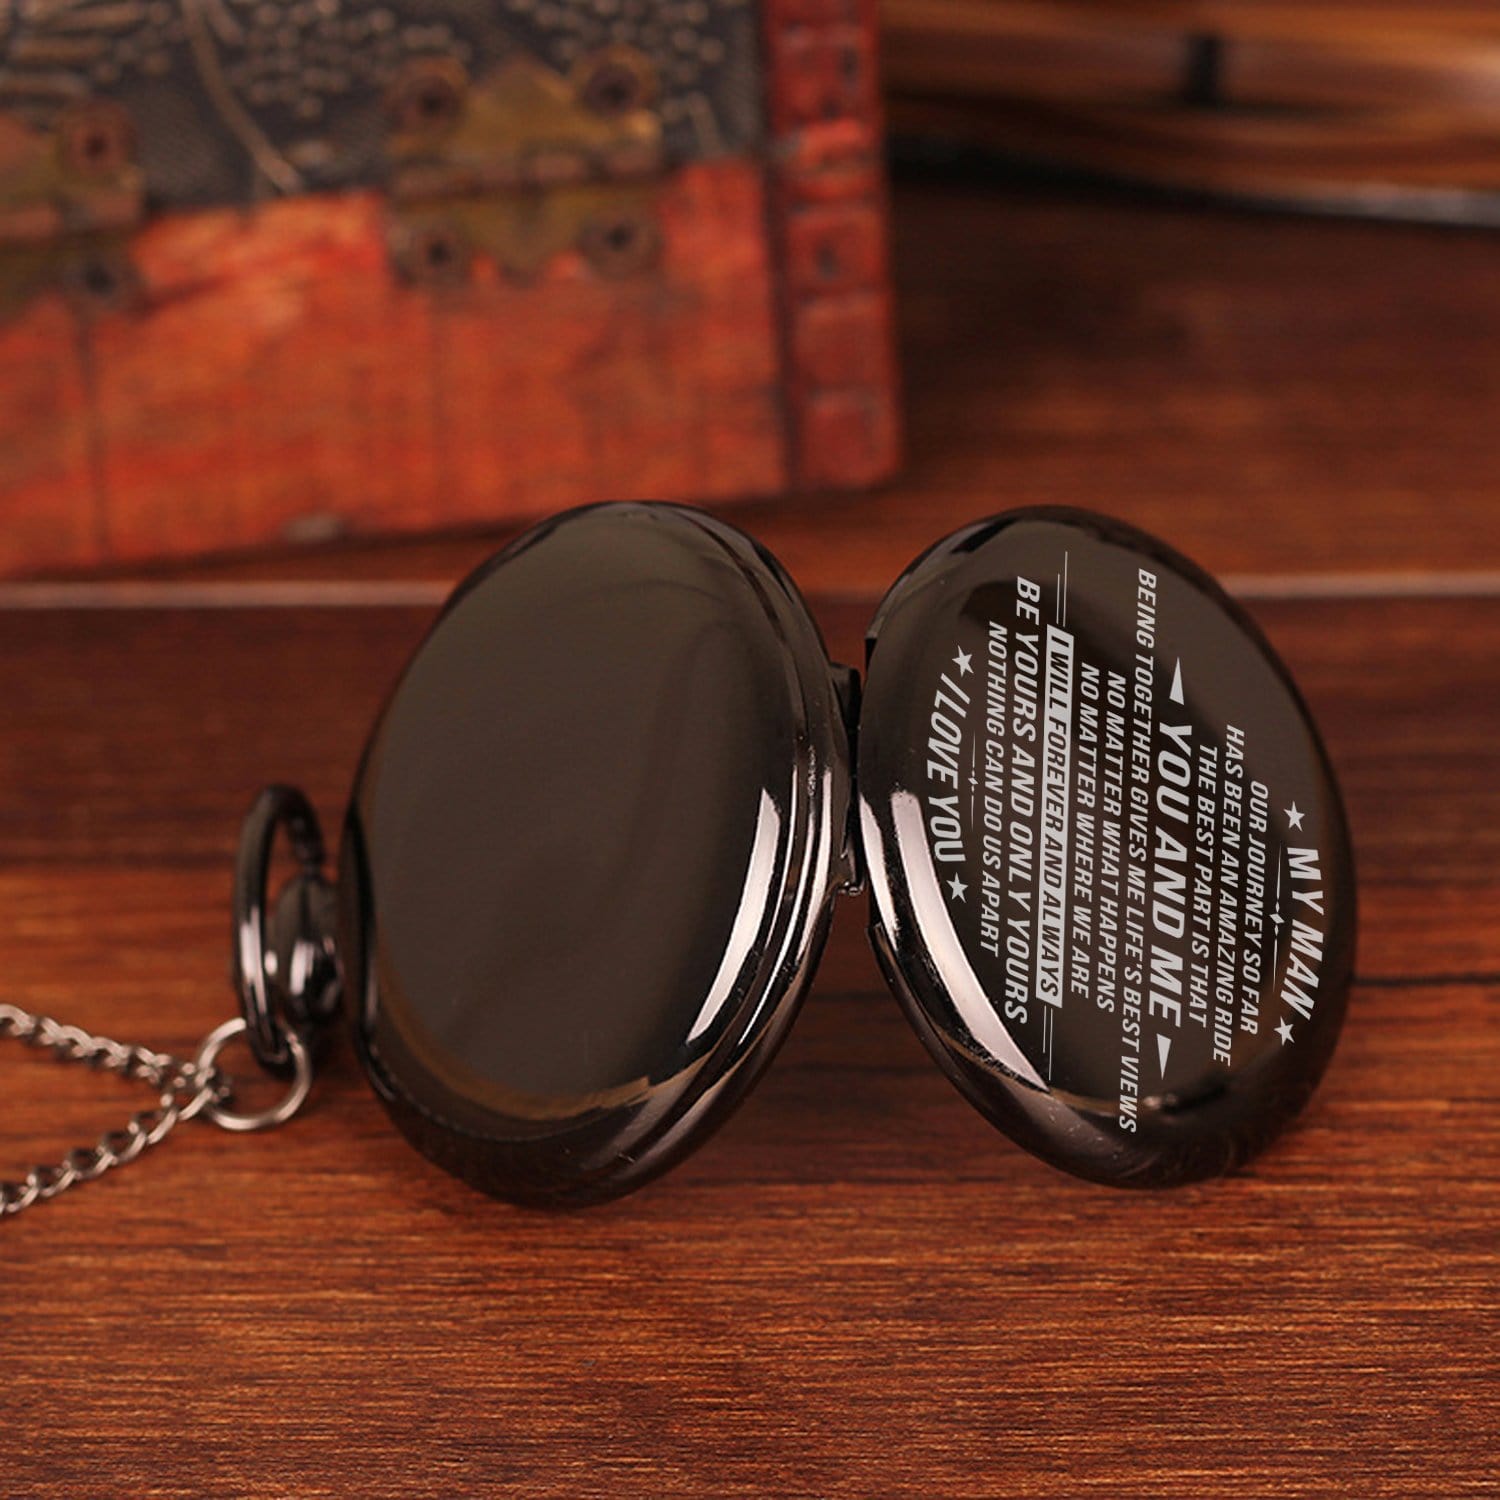 Pocket Watches To My Man - I Will Forever And Always Be Yours Pocket Watch GiveMe-Gifts